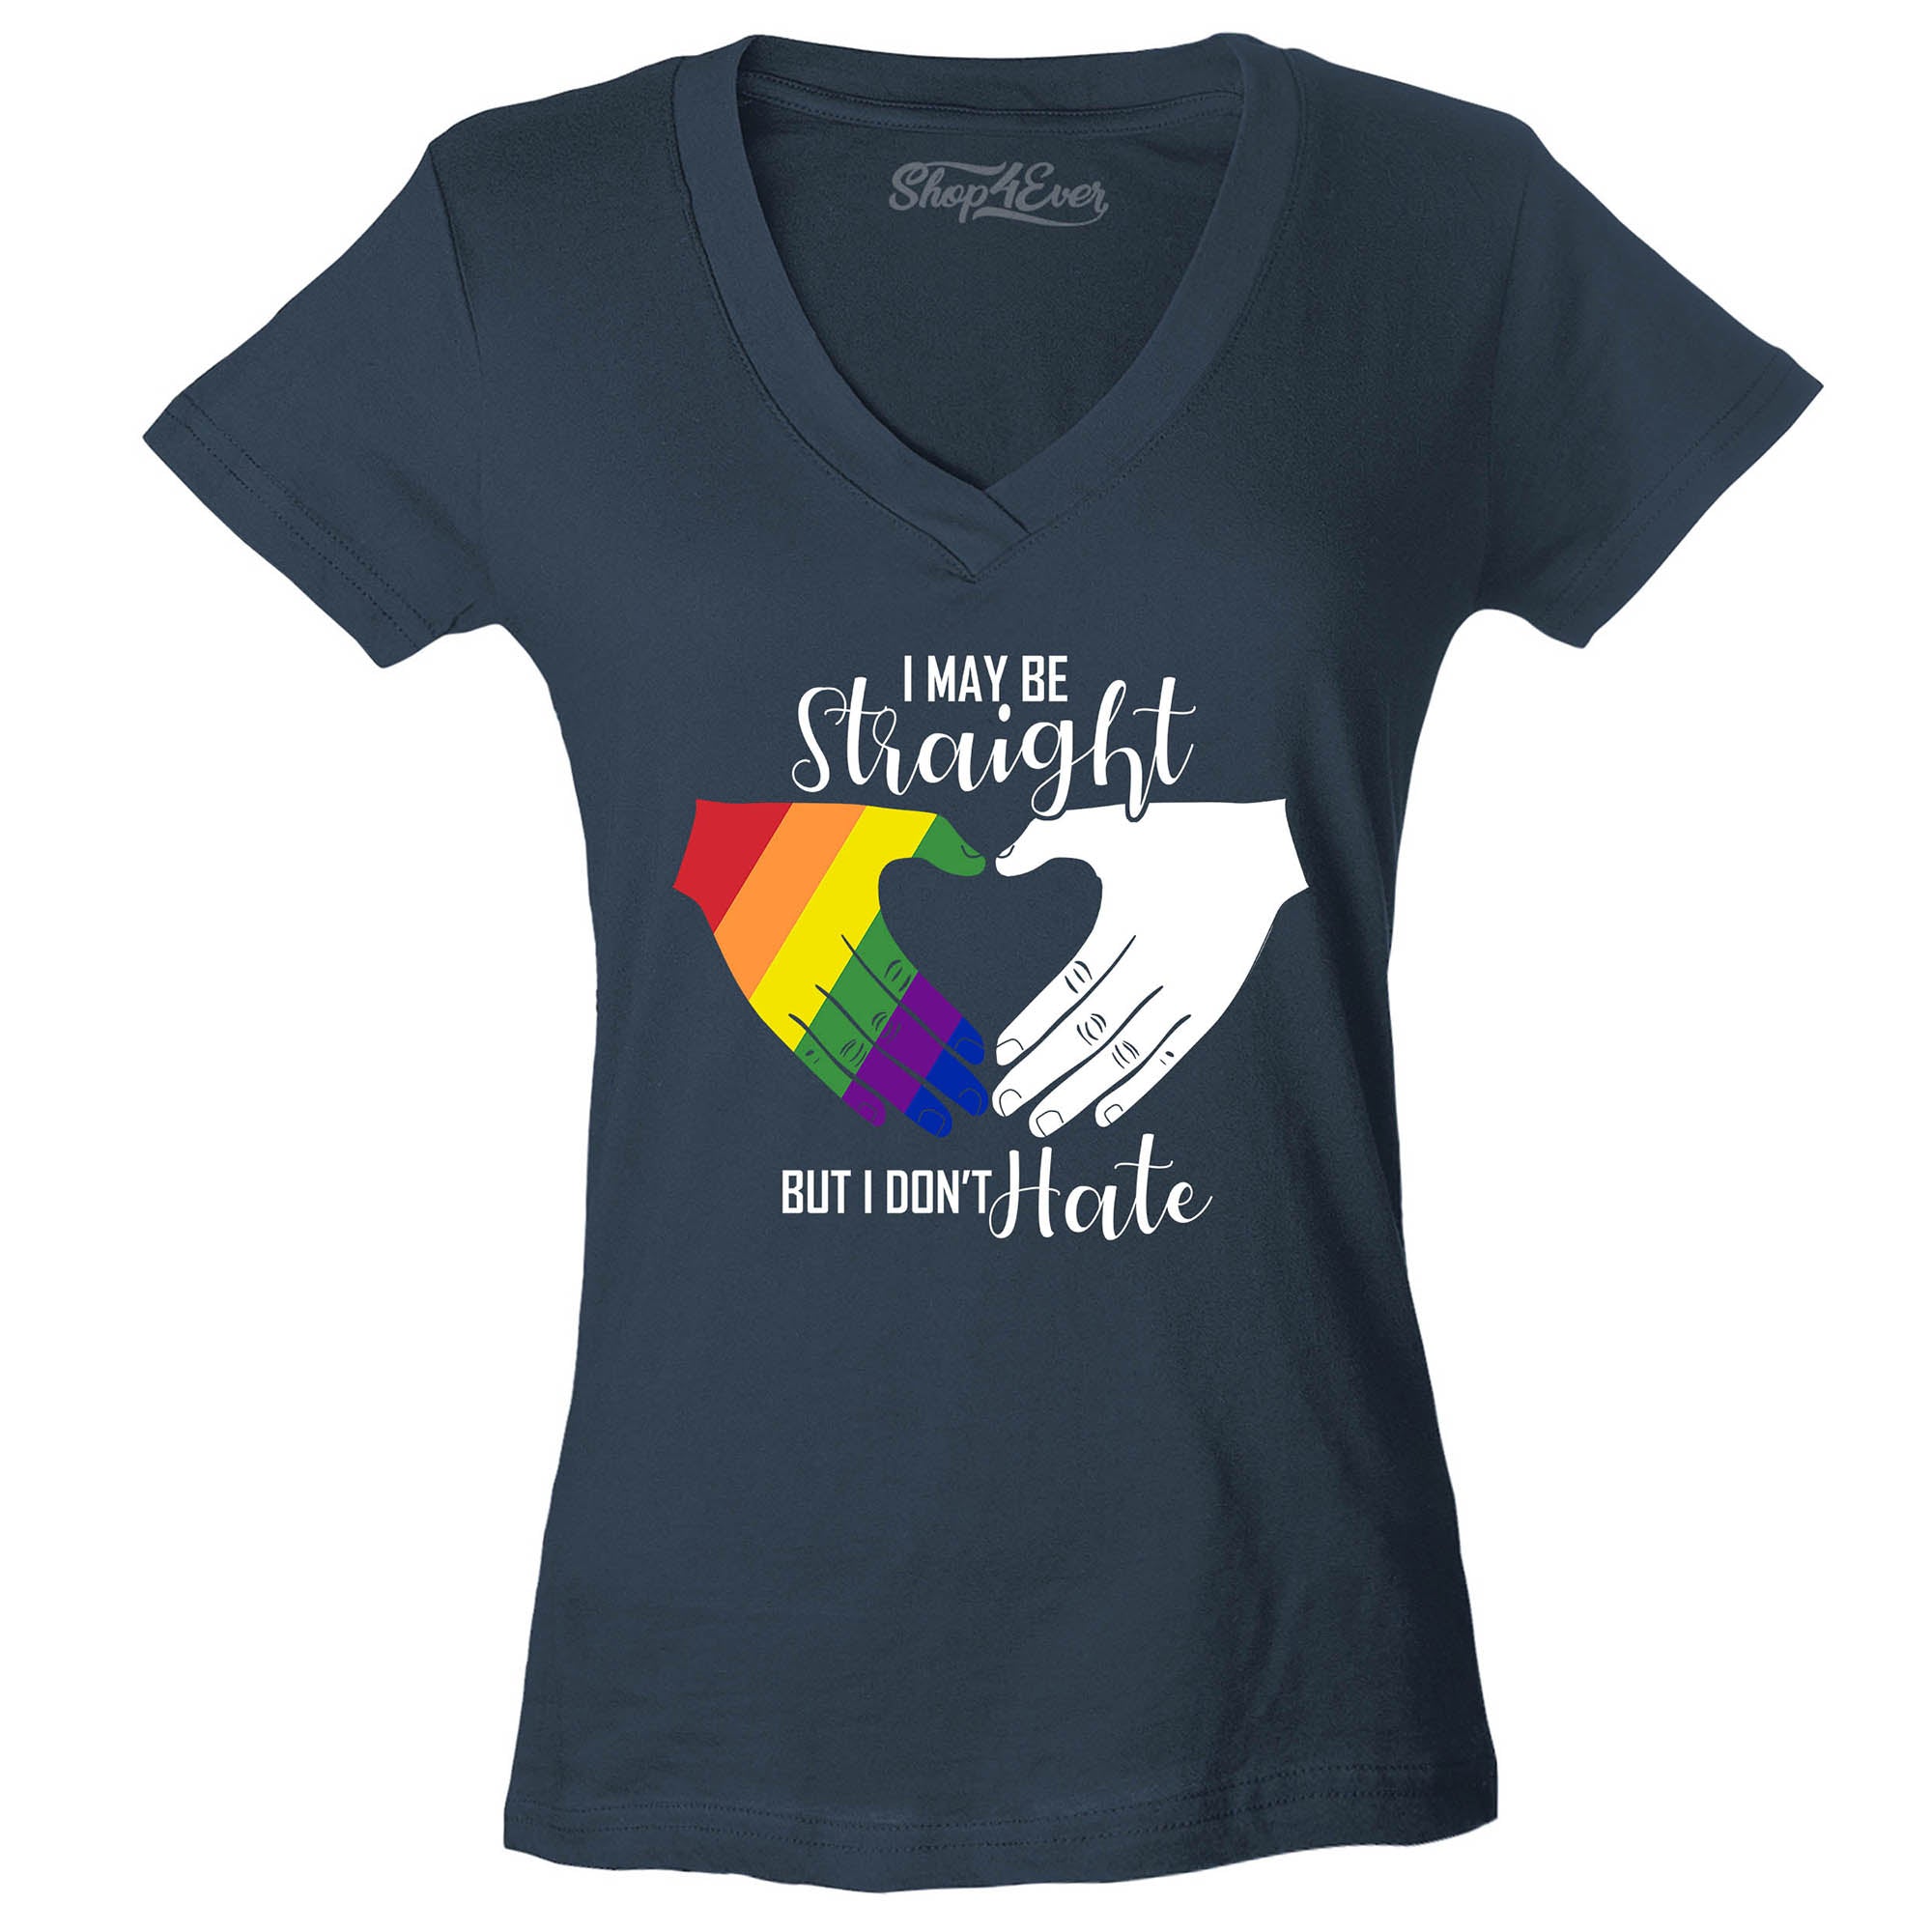 I May Be Straight but I Don't Hate ~ Gay Pride Women's V-Neck T-Shirt Slim Fit